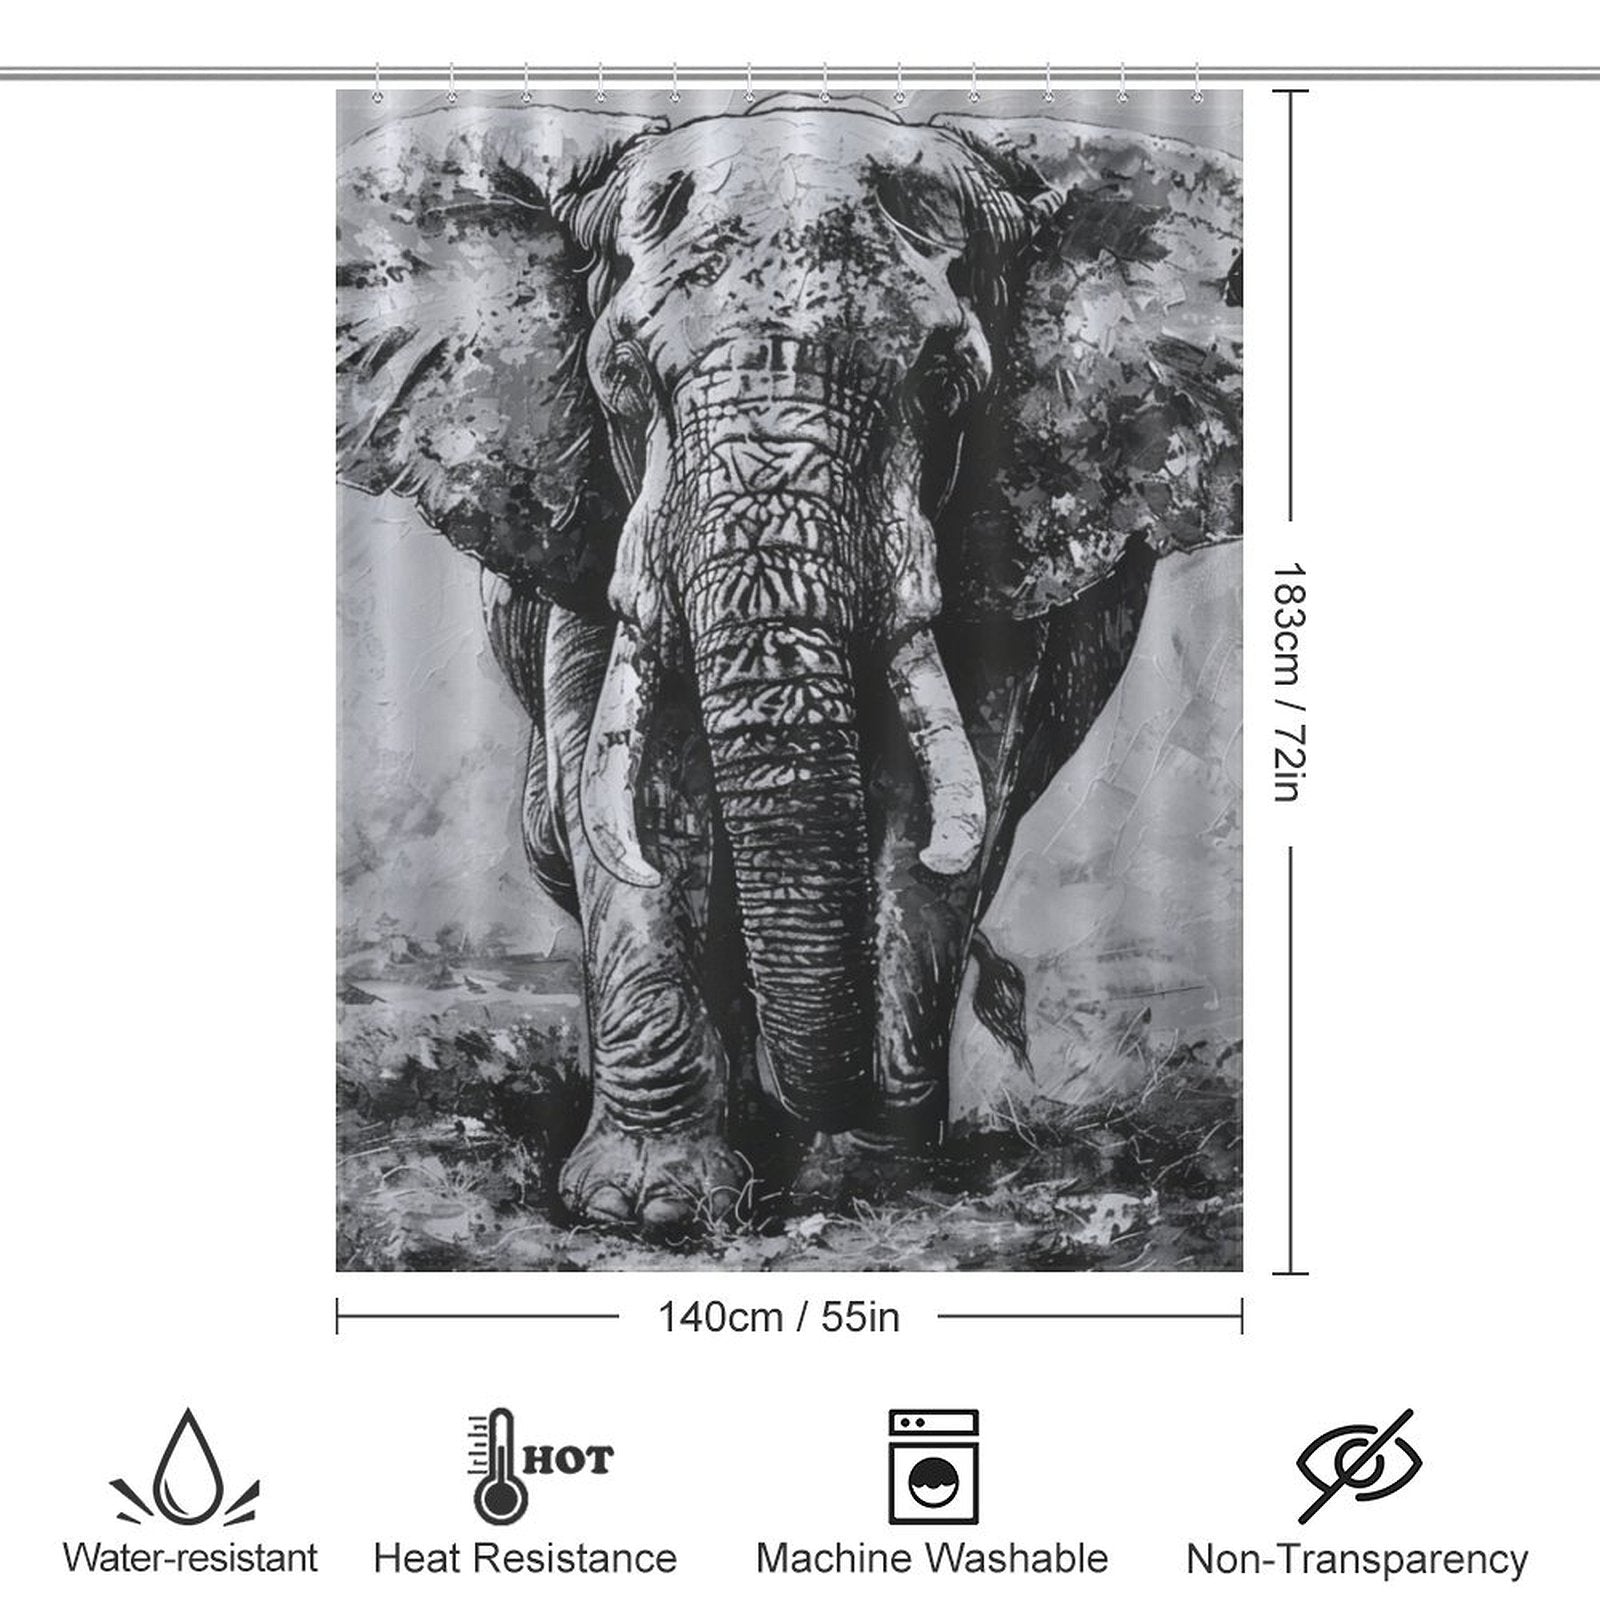 Introducing the Black and White Elephant Shower Curtain-Cottoncat, featuring a grayscale image of an elegant elephant. This bathroom decor piece is water-resistant, heat-resistant, machine washable, and non-transparent. Dimensions: 183 cm x 140 cm. Perfect for adding a touch of sophistication to your space by Cotton Cat.